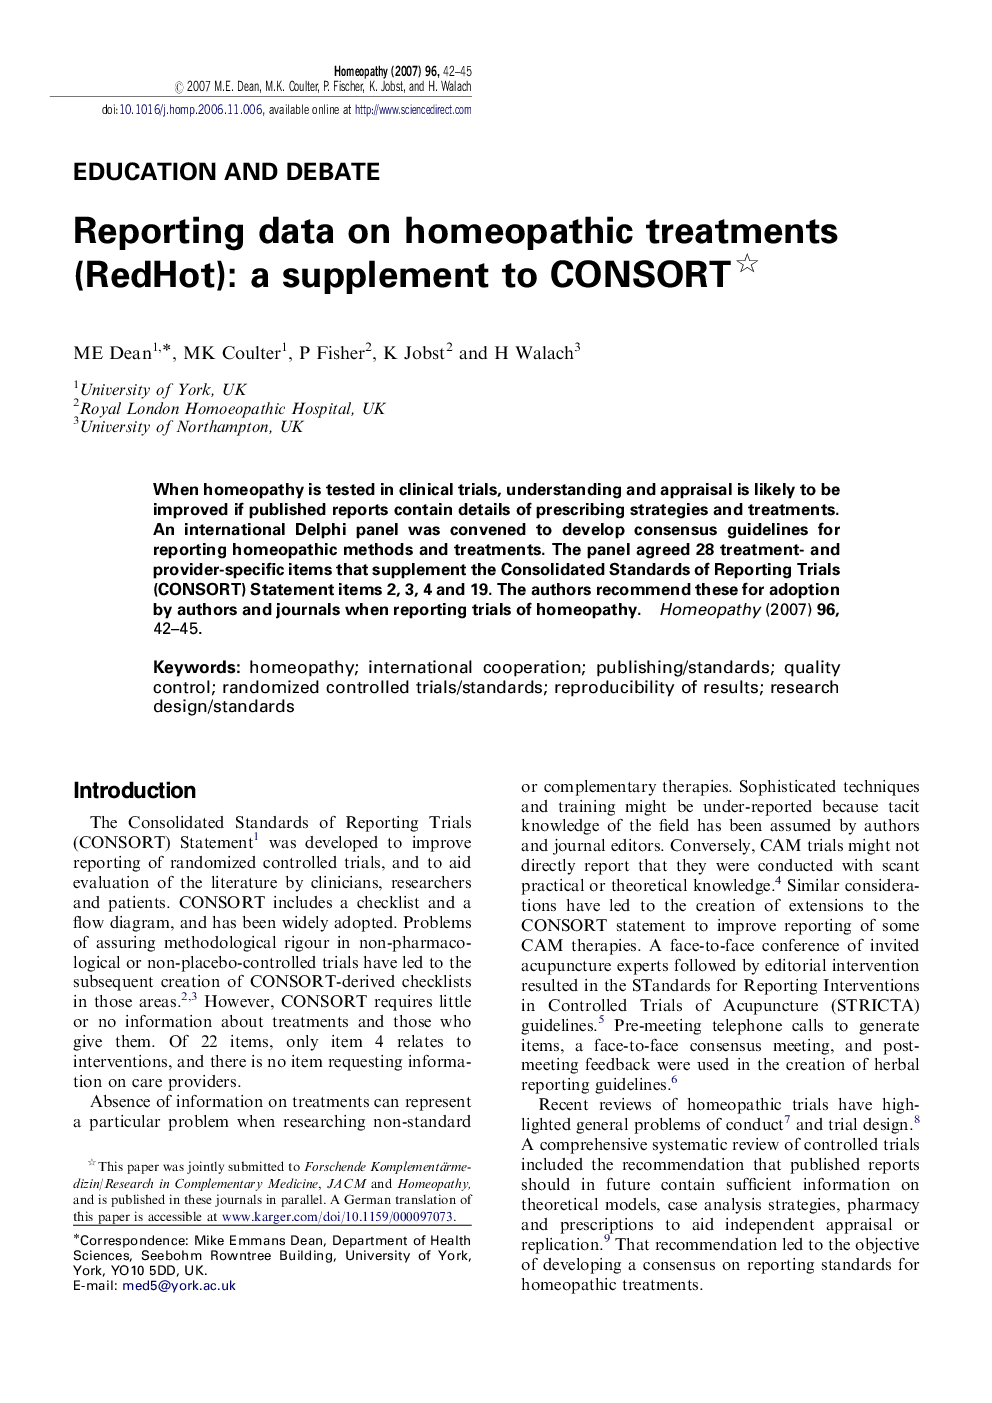 Reporting data on homeopathic treatments (RedHot): a supplement to CONSORT 